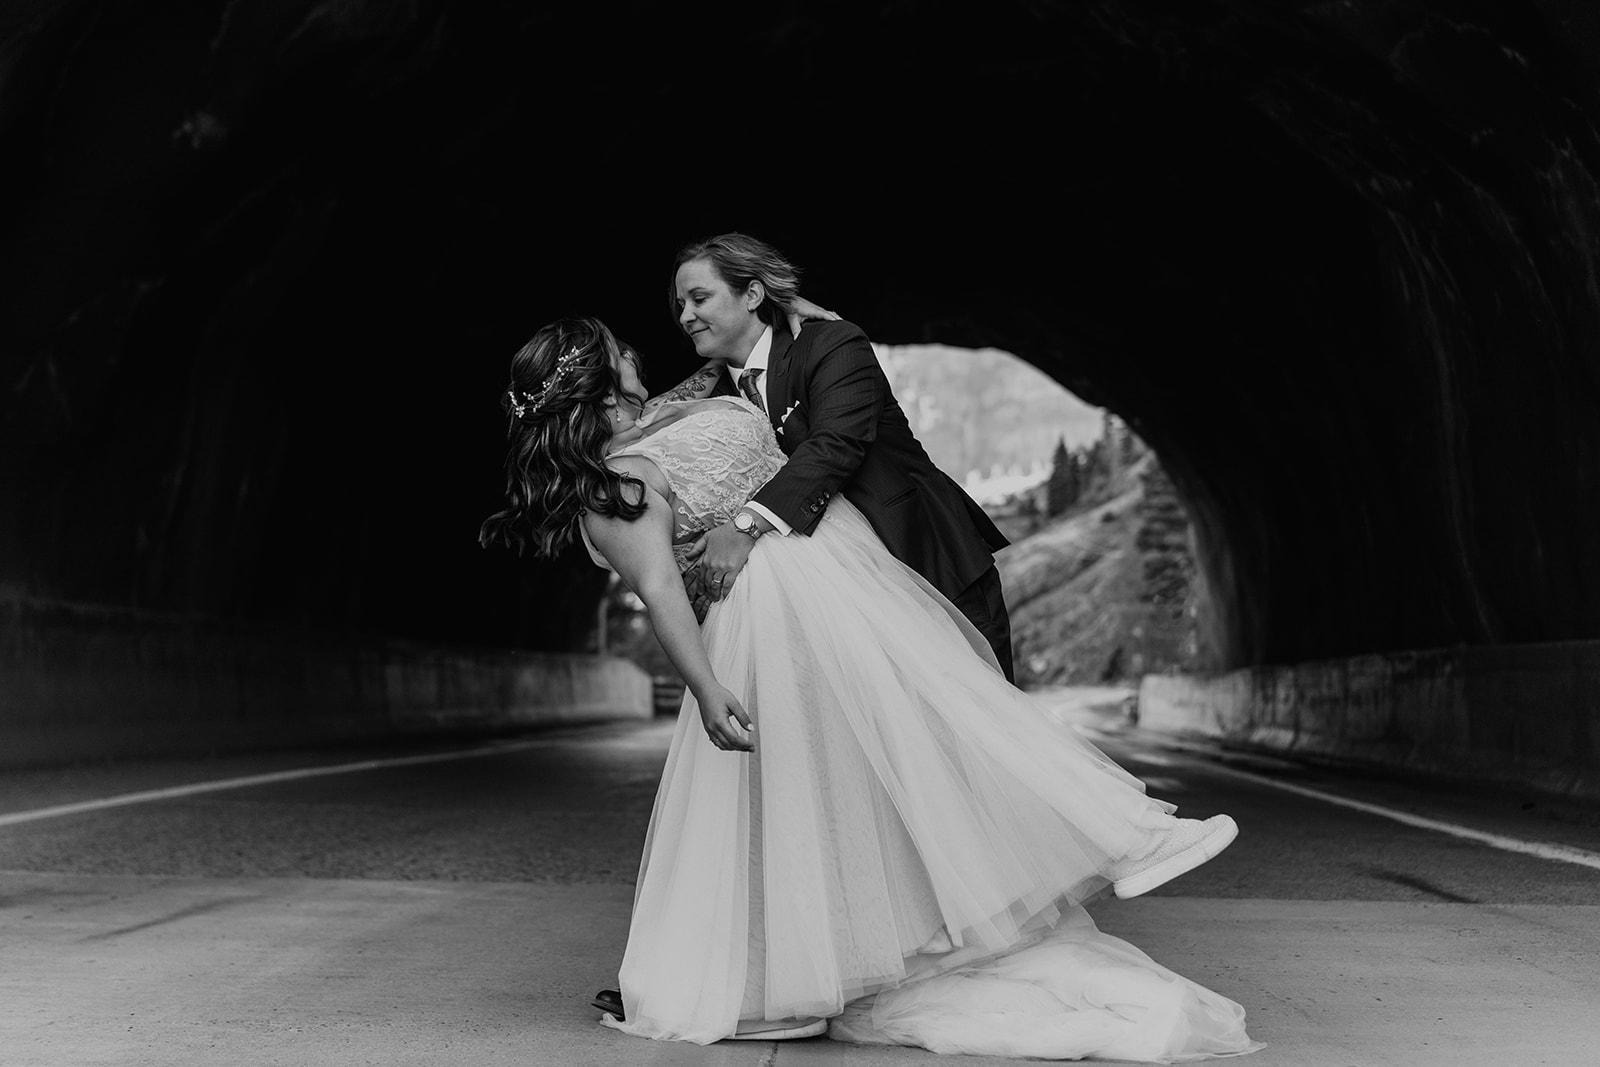 Black and white photo of bride dipping bride